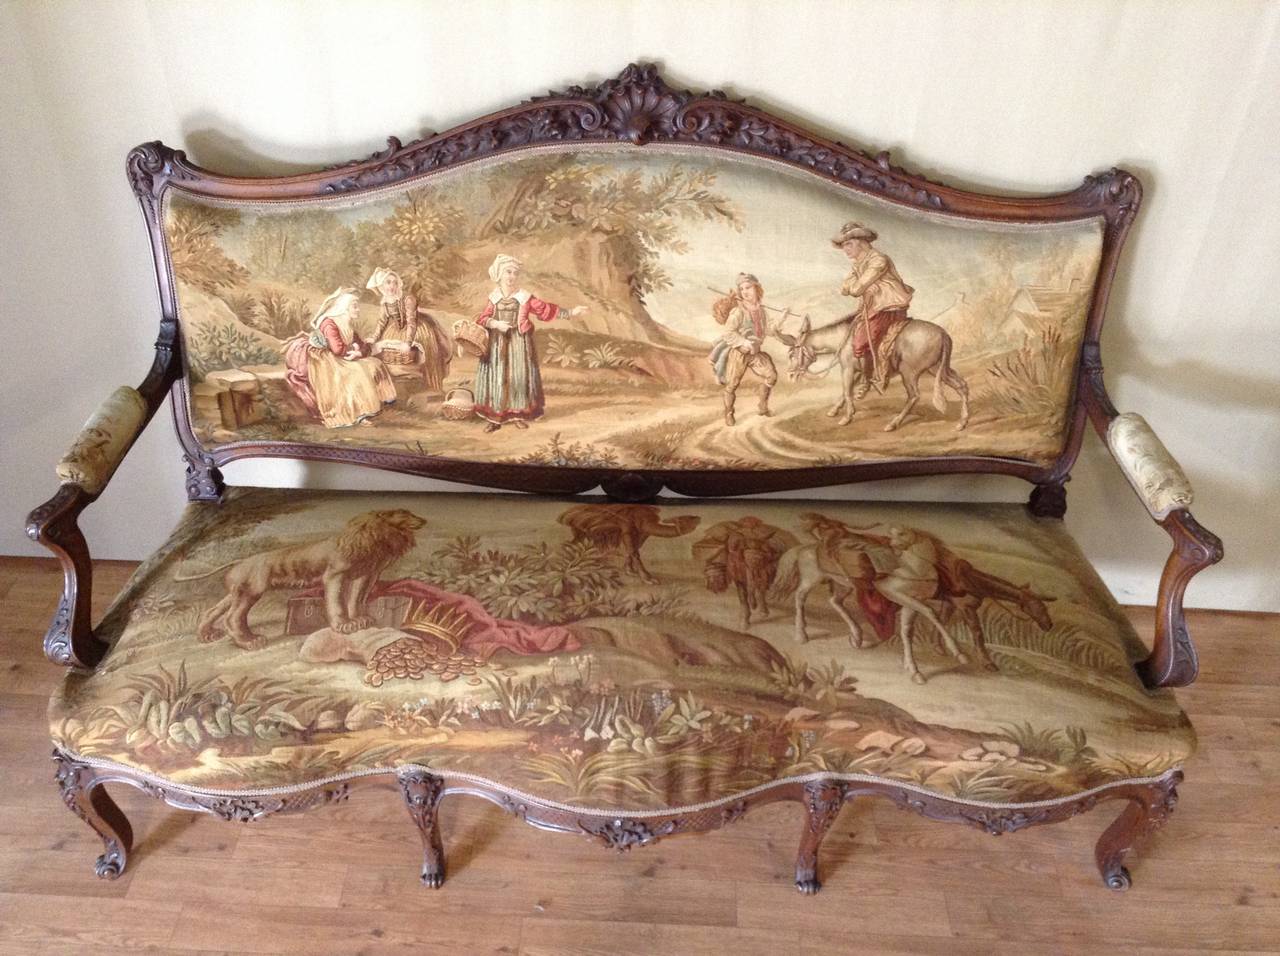 Exceptional richly carved walnut salon set, consisting of 6 armchairs, 1 large sofa and 2 chairs.
Arched Legs.

Upholstered in Aubusson tapestries * in very good condition.

Napoleon III period.

Sun: Sofa: H. 113 x L 172 x P 60 cm (H. seat: